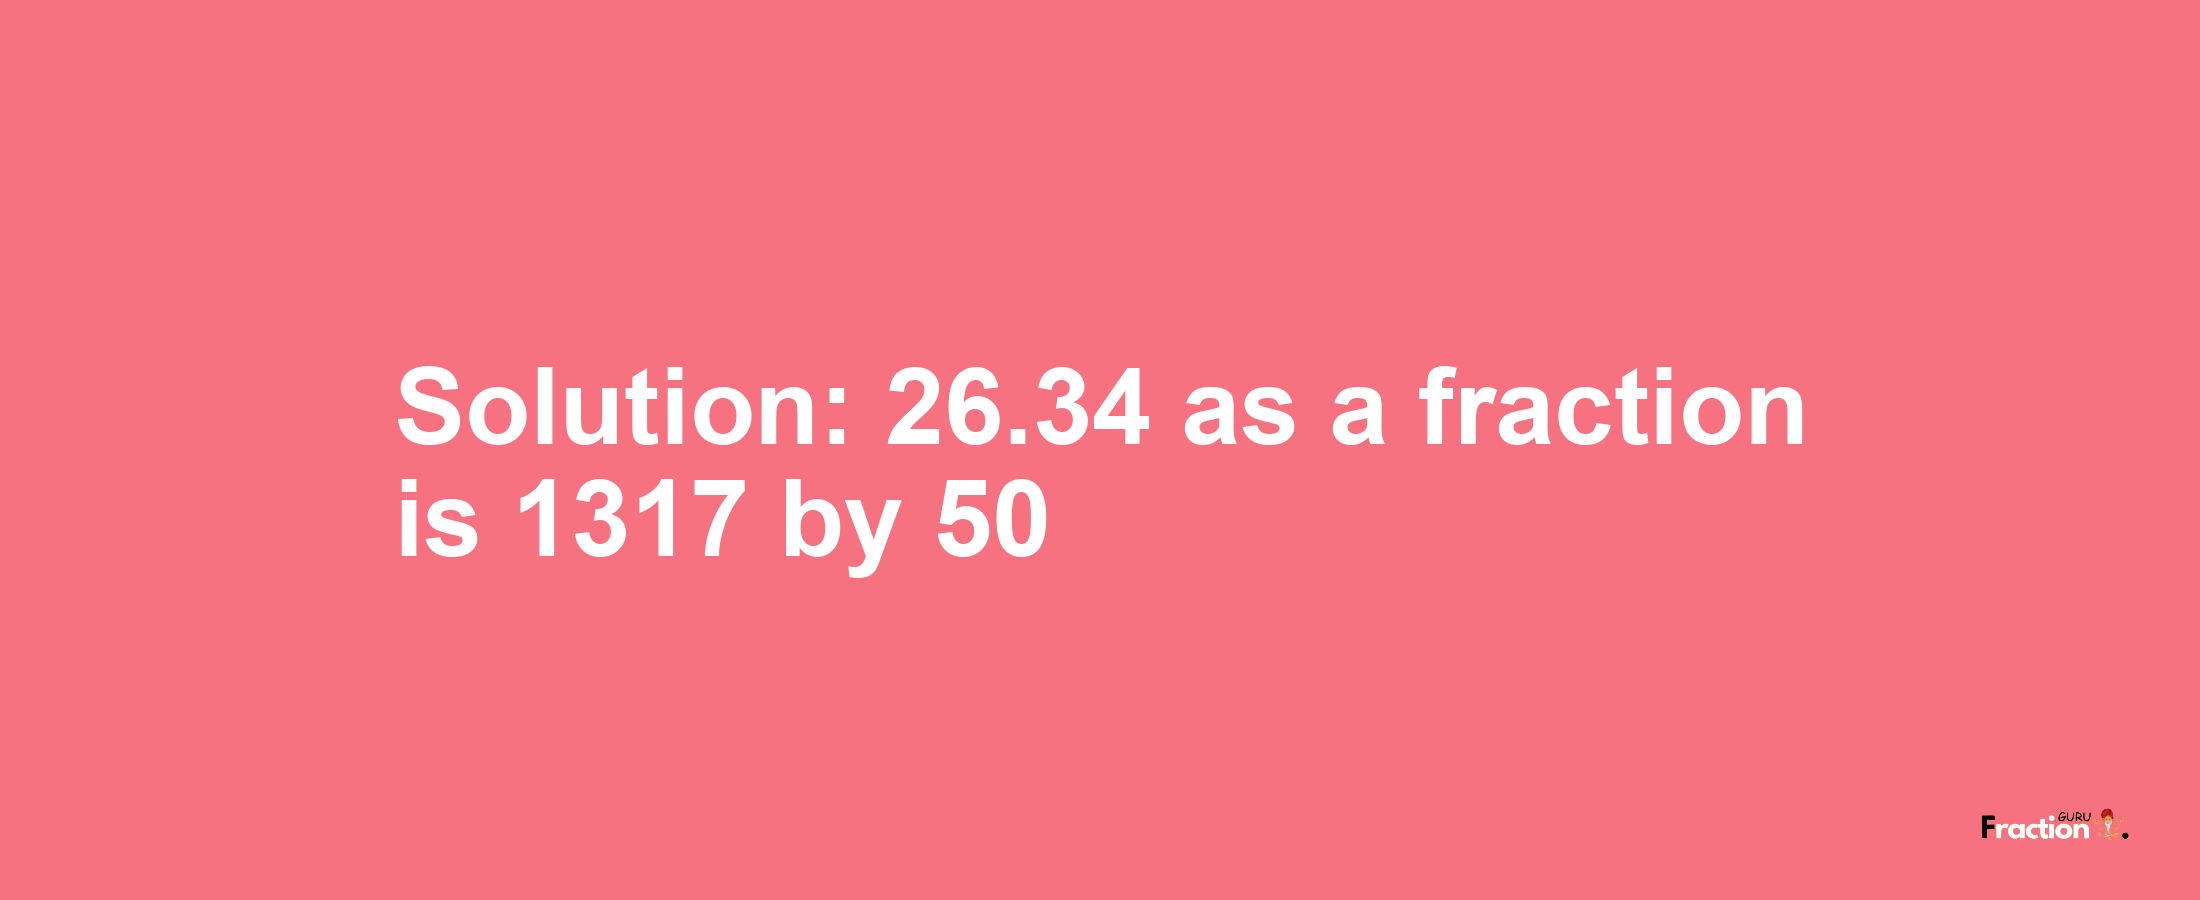 Solution:26.34 as a fraction is 1317/50